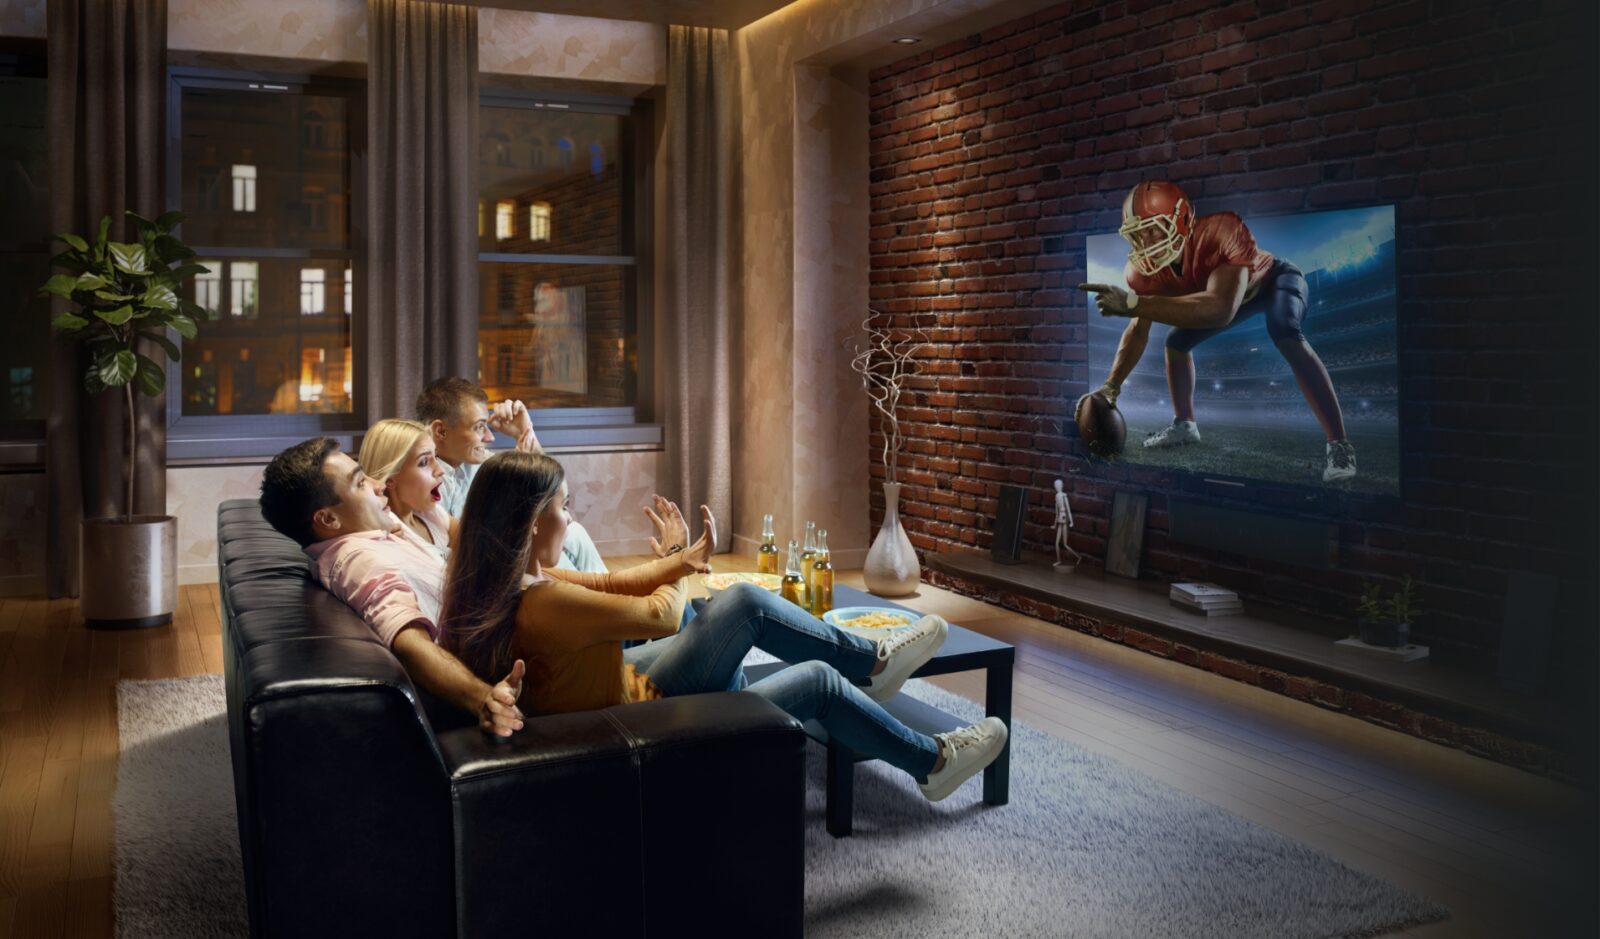 group of people on couch watching tv with football player